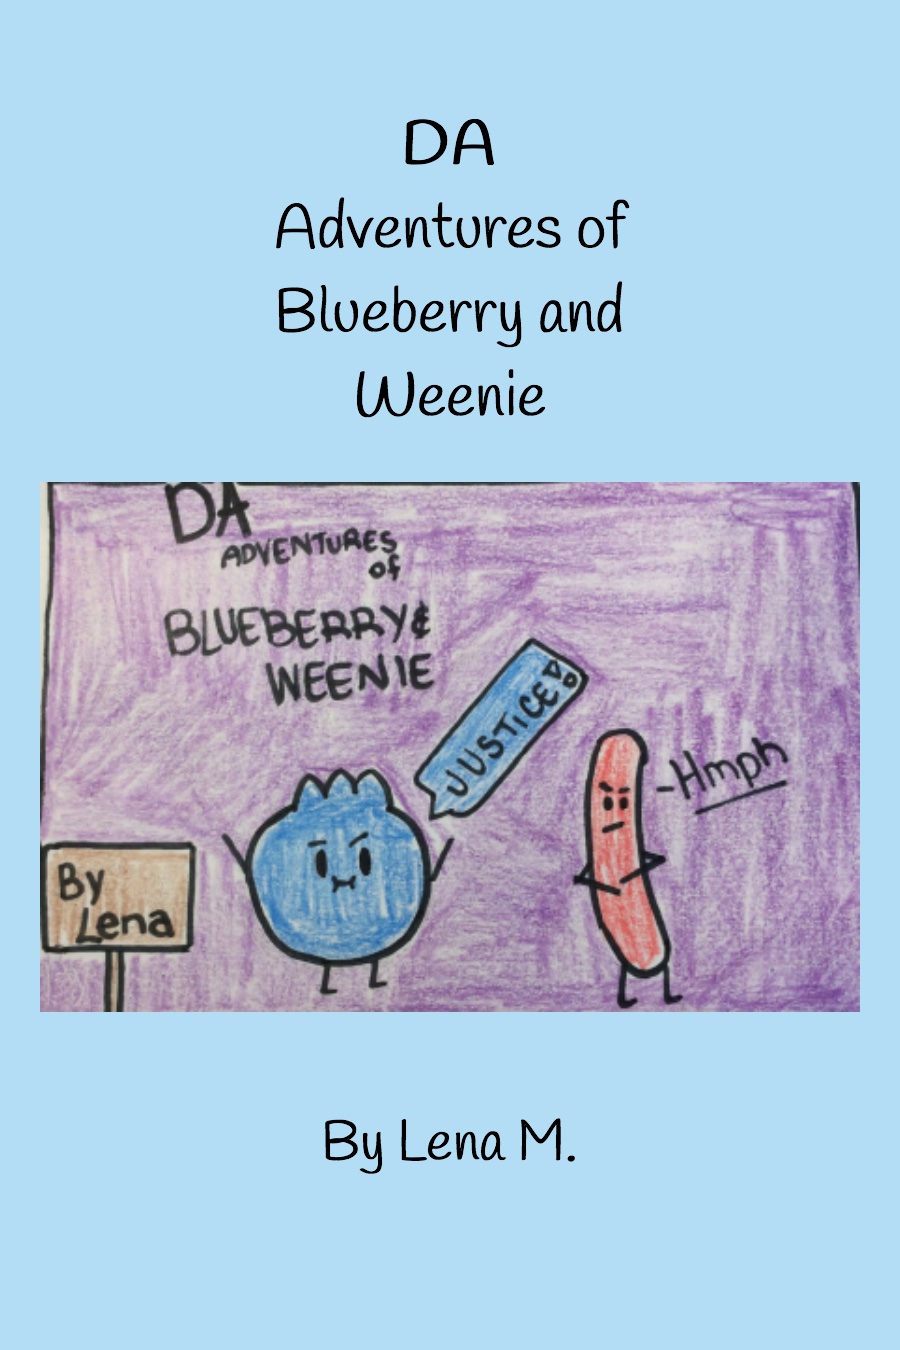 Da Adventures of Blueberry and Weenie by Lena M